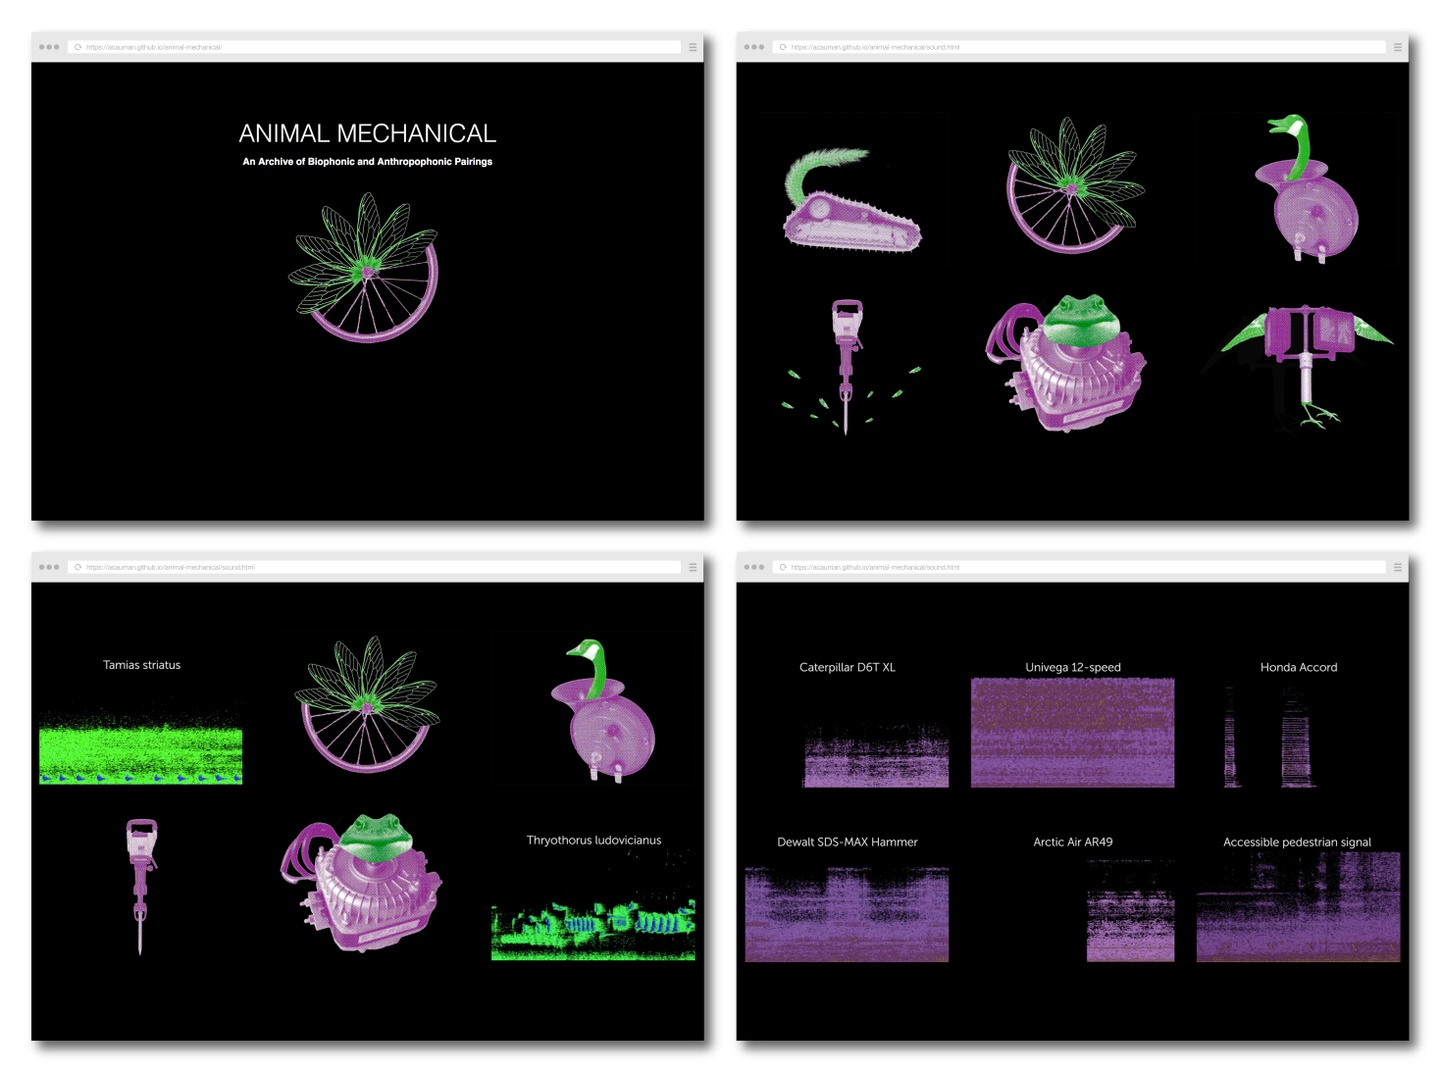 Screenshots of a website tiled 2x2: (upper left) is the landing page, which is titled "ANIMAL MECHANICAL" with the text "An Archive of Biophonic and Anthropomorphic Pairings" below. Underneath this text is what appears to be leaves/petals (in green) that transforms into a bicycle wheel (purple). Six images of such animal/mechanical pairings (upper right), with the animal part in green and the mechanical portion in purple. (Lower two screenshots) each image also turns into a more abstract composition, (lower left) some green with Latin text in white, others (lower right) purple with supplementary text in white.